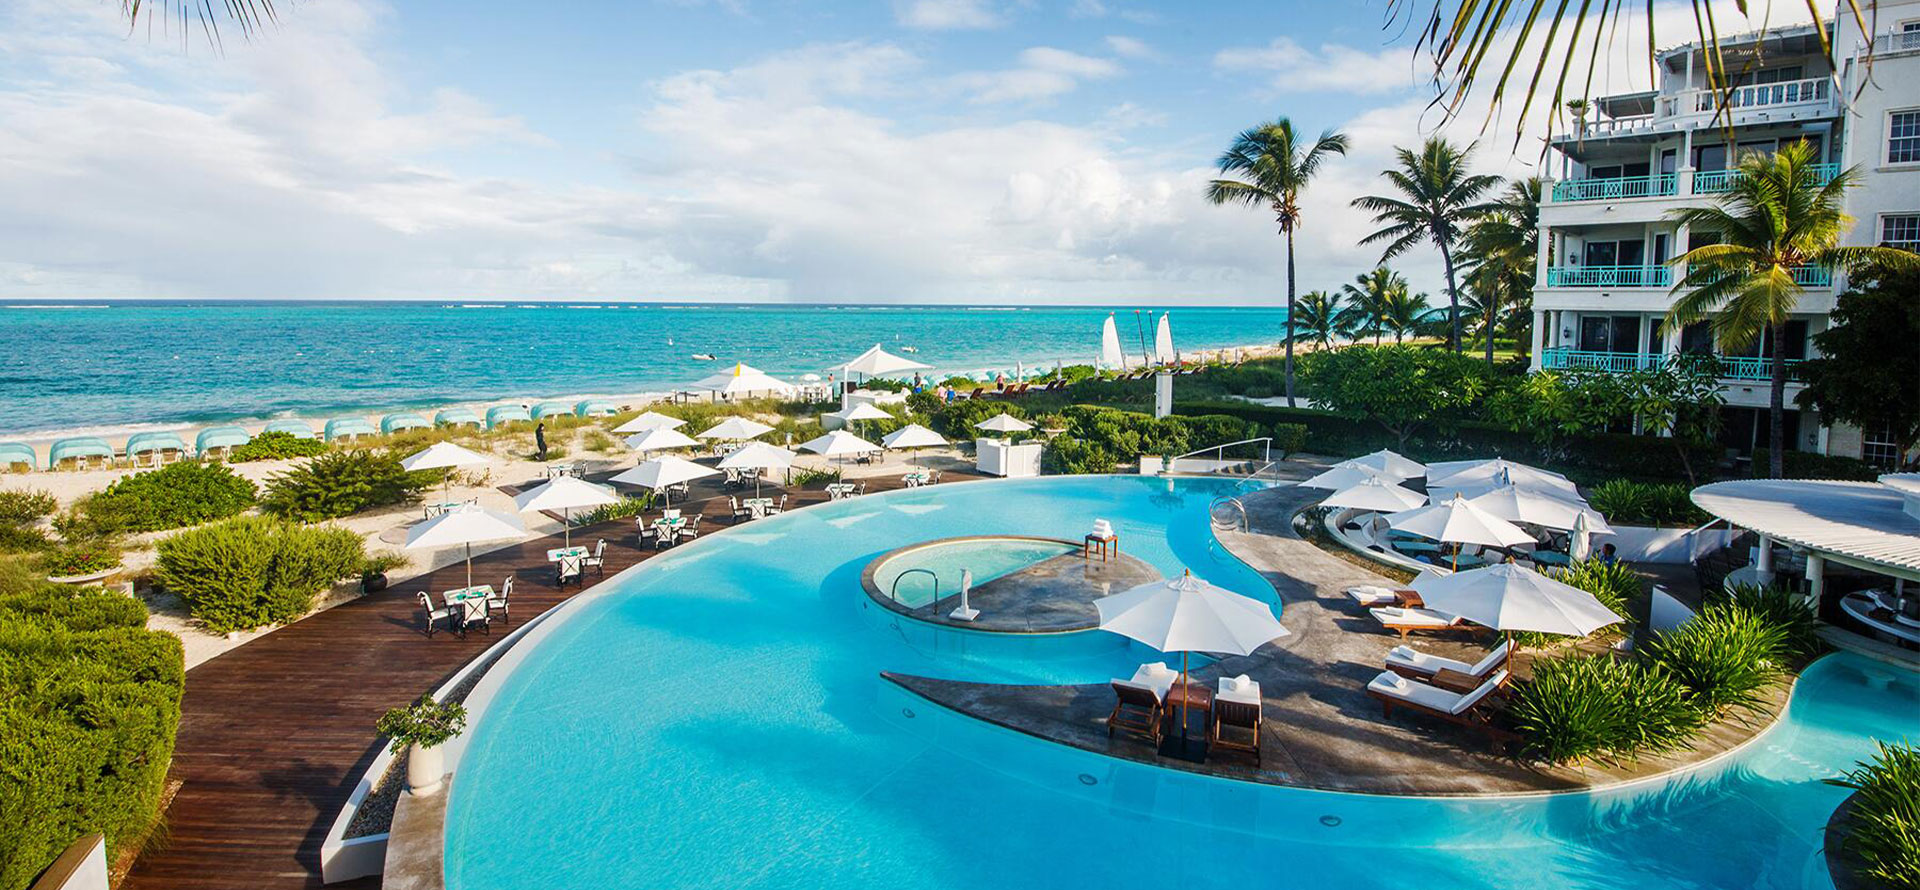 Turks and caicos beautiful beach with all-inclusive family resort.